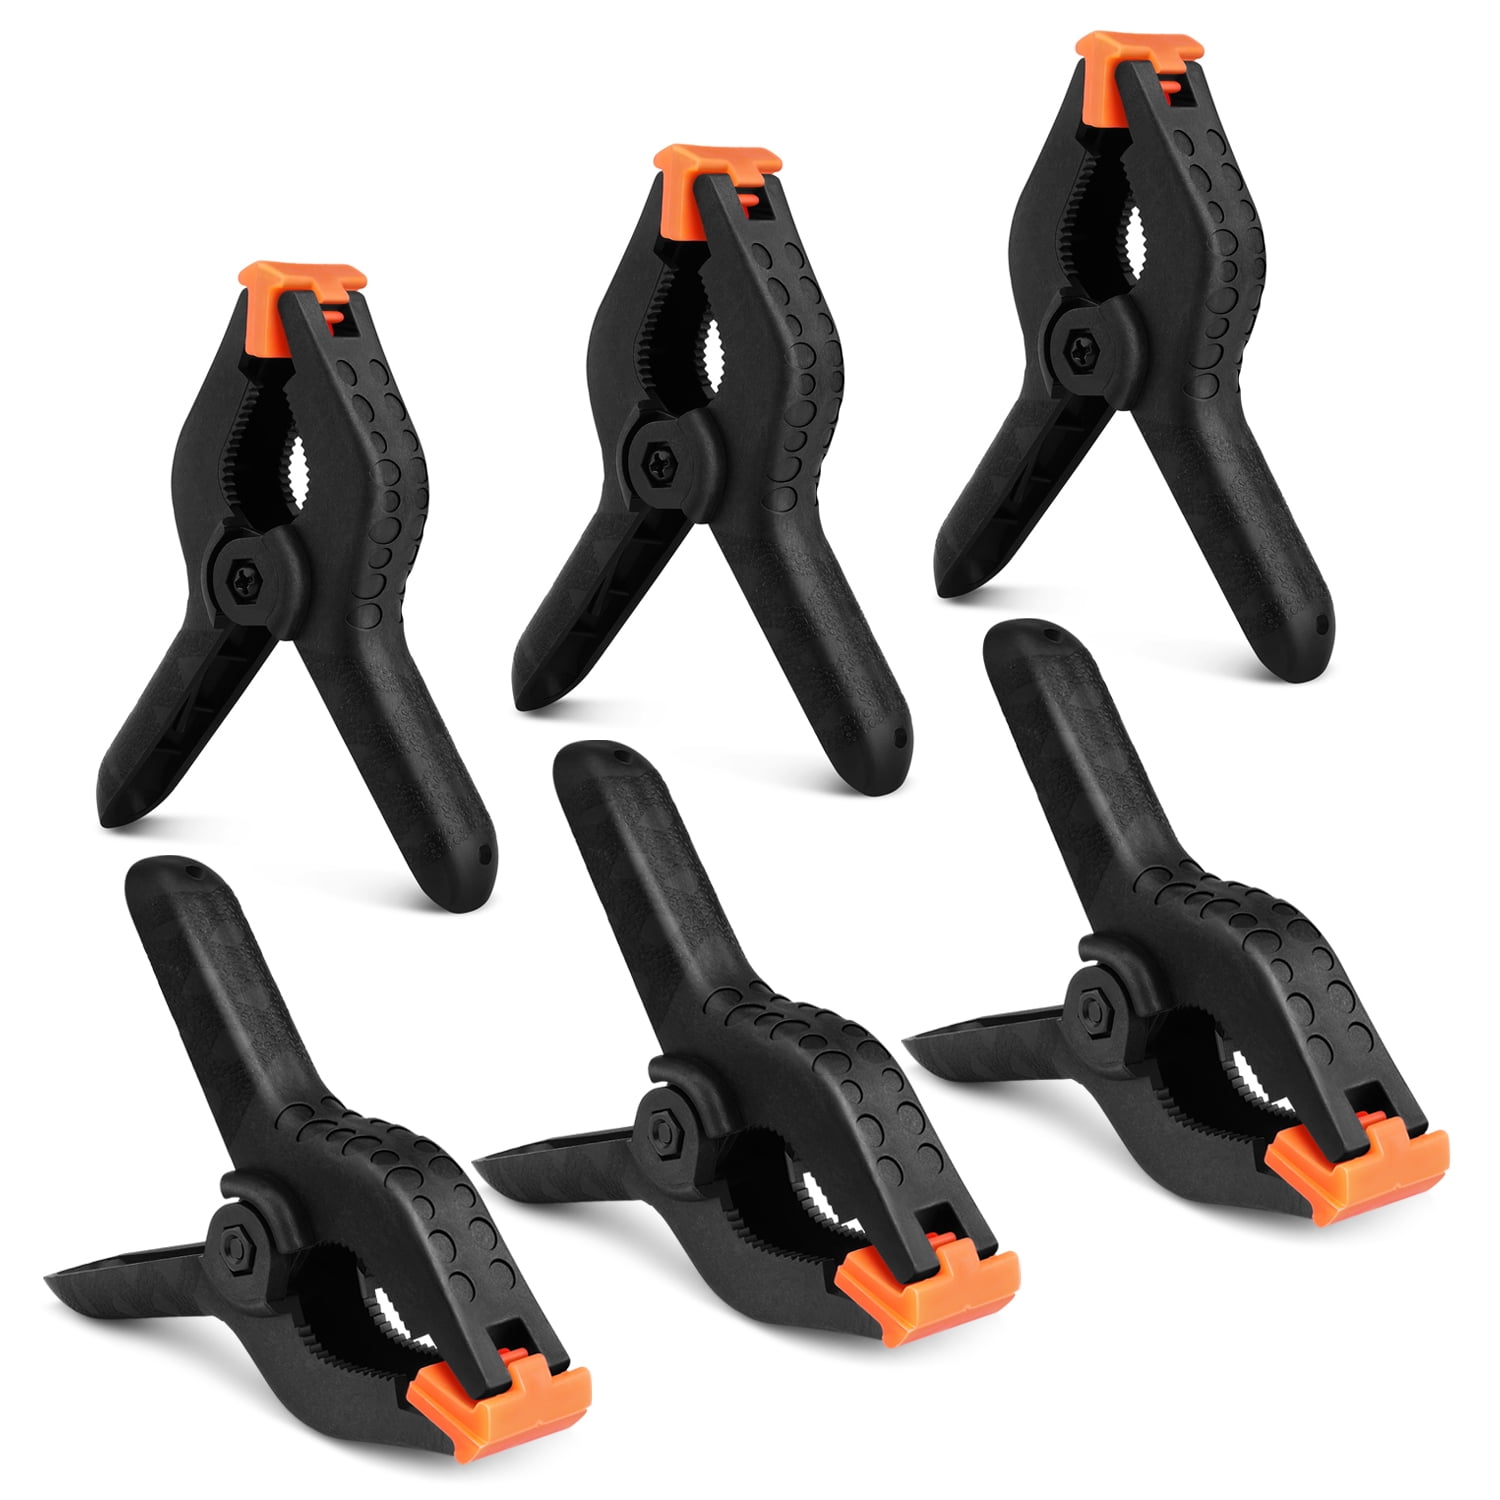 Photo Art & Crafts Coideal 6 Pack Plastic Nylon Spring Clamps for Photography Backgrounds/Large Black Heavy-Duty Market Stall Clips DIY Tools Muslin Backdrops Clamp Clips for Studio 4.5 Inch 